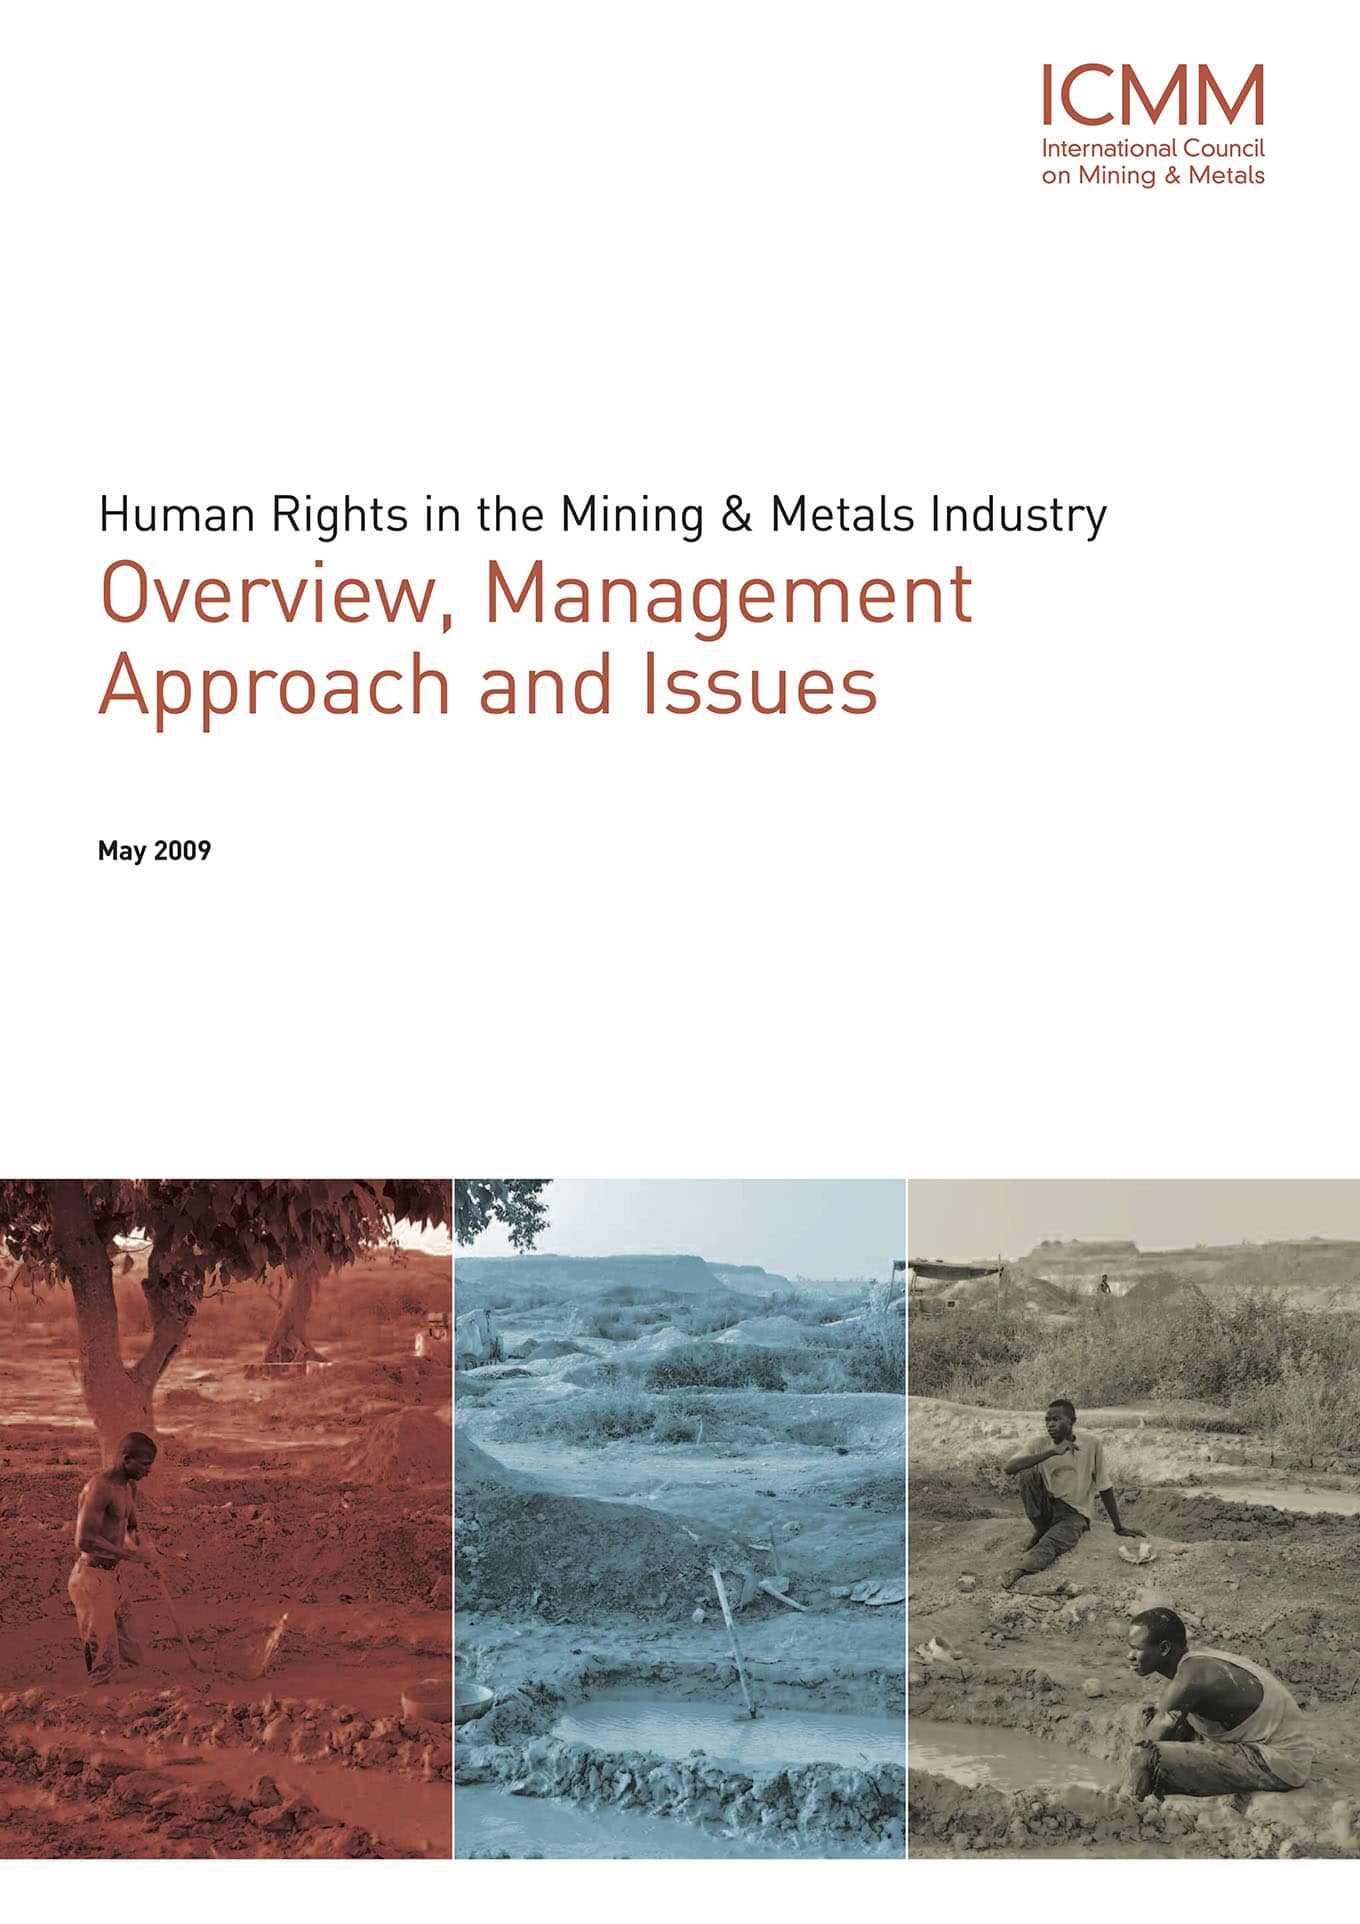 Human Rights in the Mining and Metals Industry - Overview, Managment Approach and Issues (ICMM, 2009)